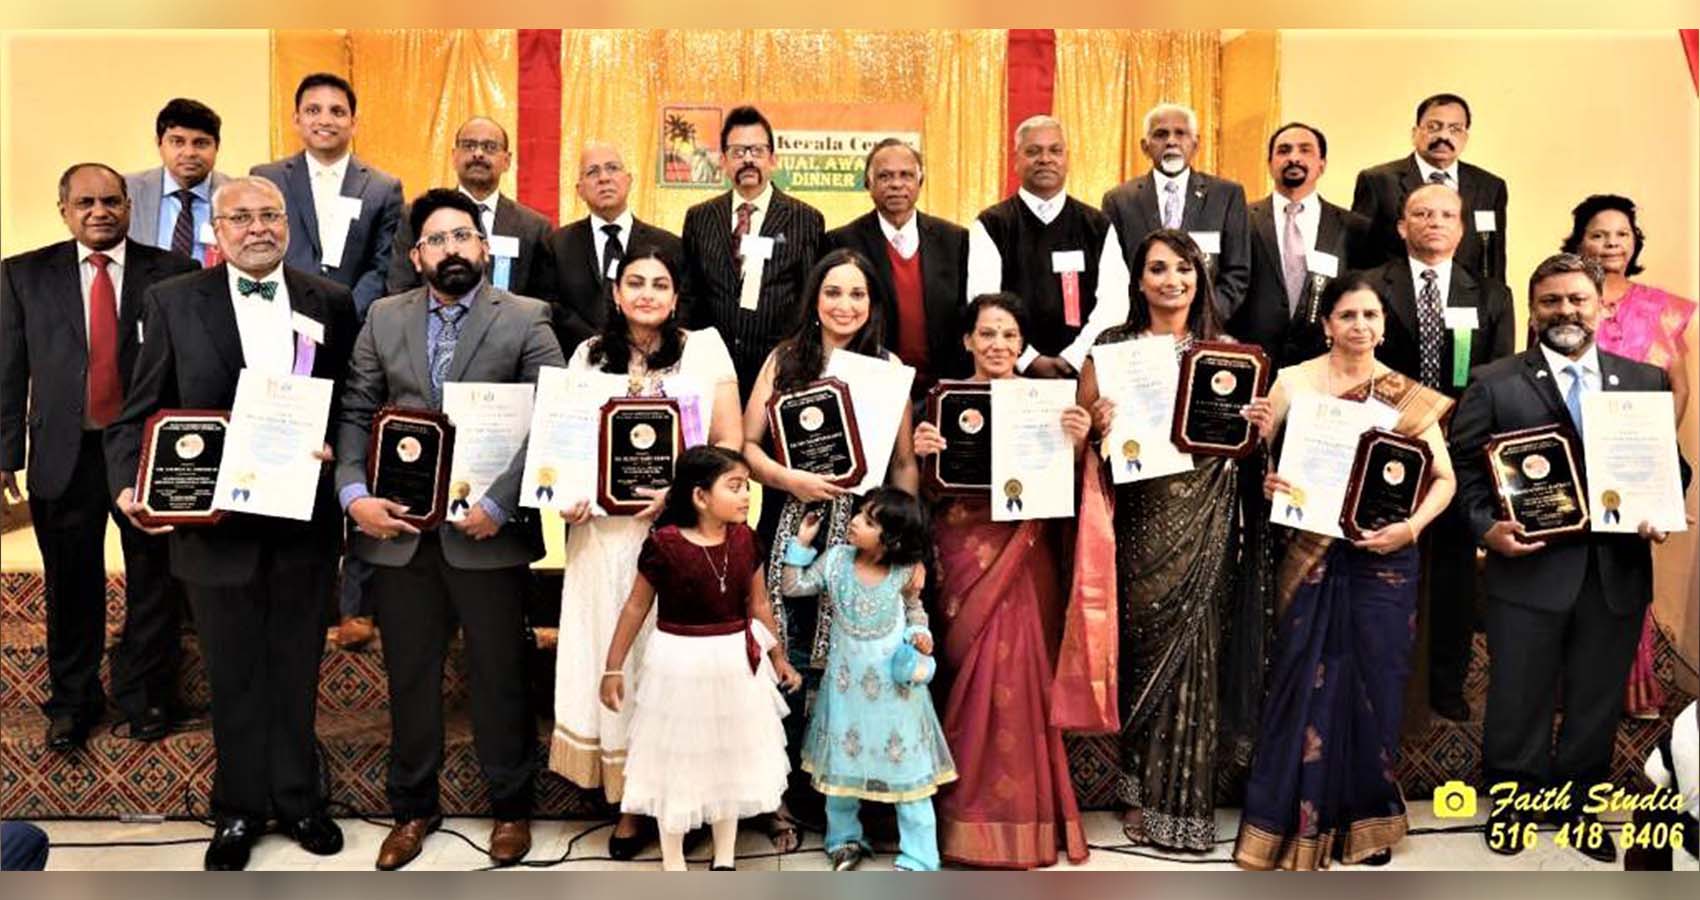 Outstanding Indian Americans Honored At Kerala Center’s Annual Awards Banquet